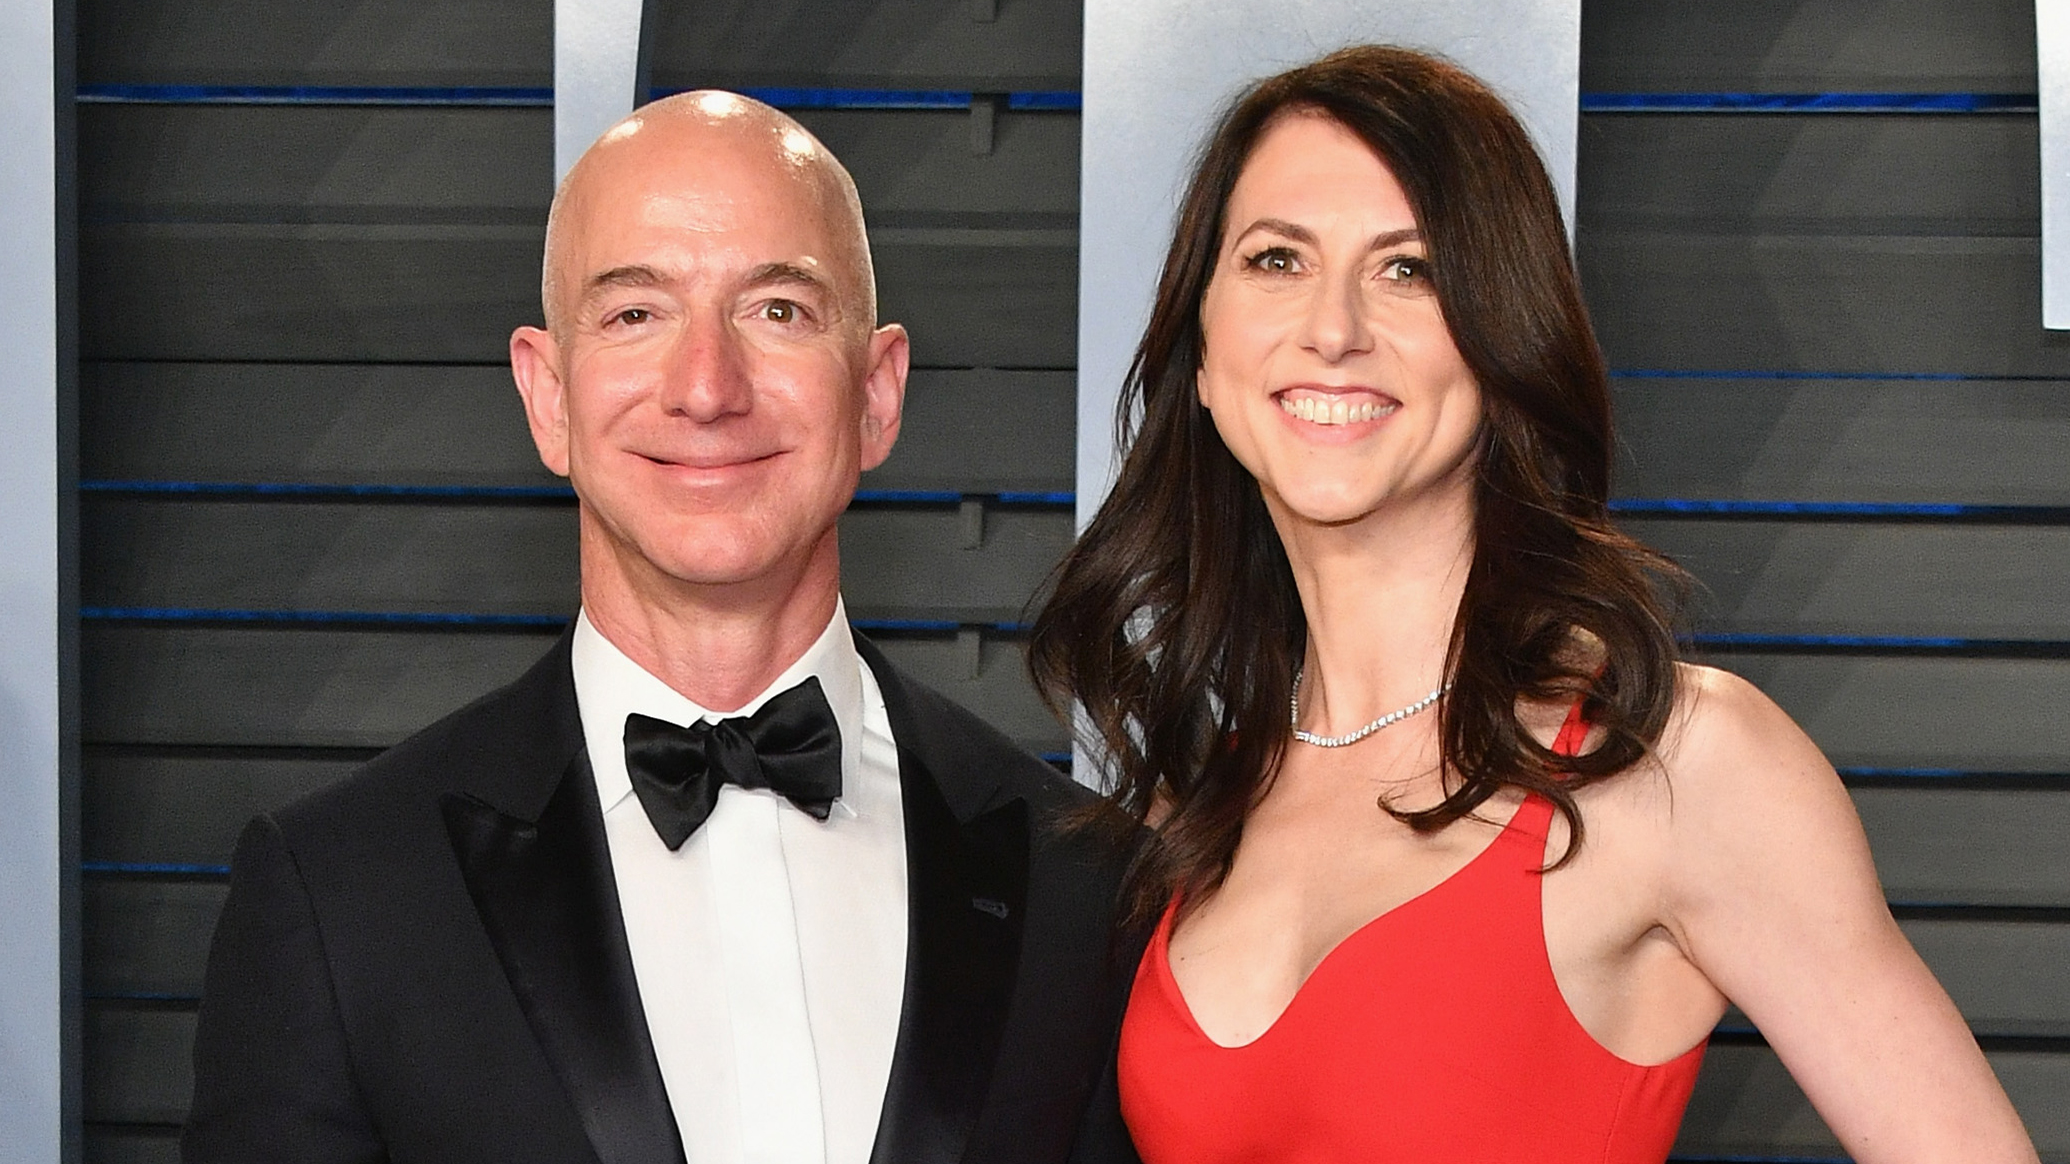 Amazon Ceo Jeff Bezos Divorcing Wife Mackenzie After 25 Years Of Marriage 5303